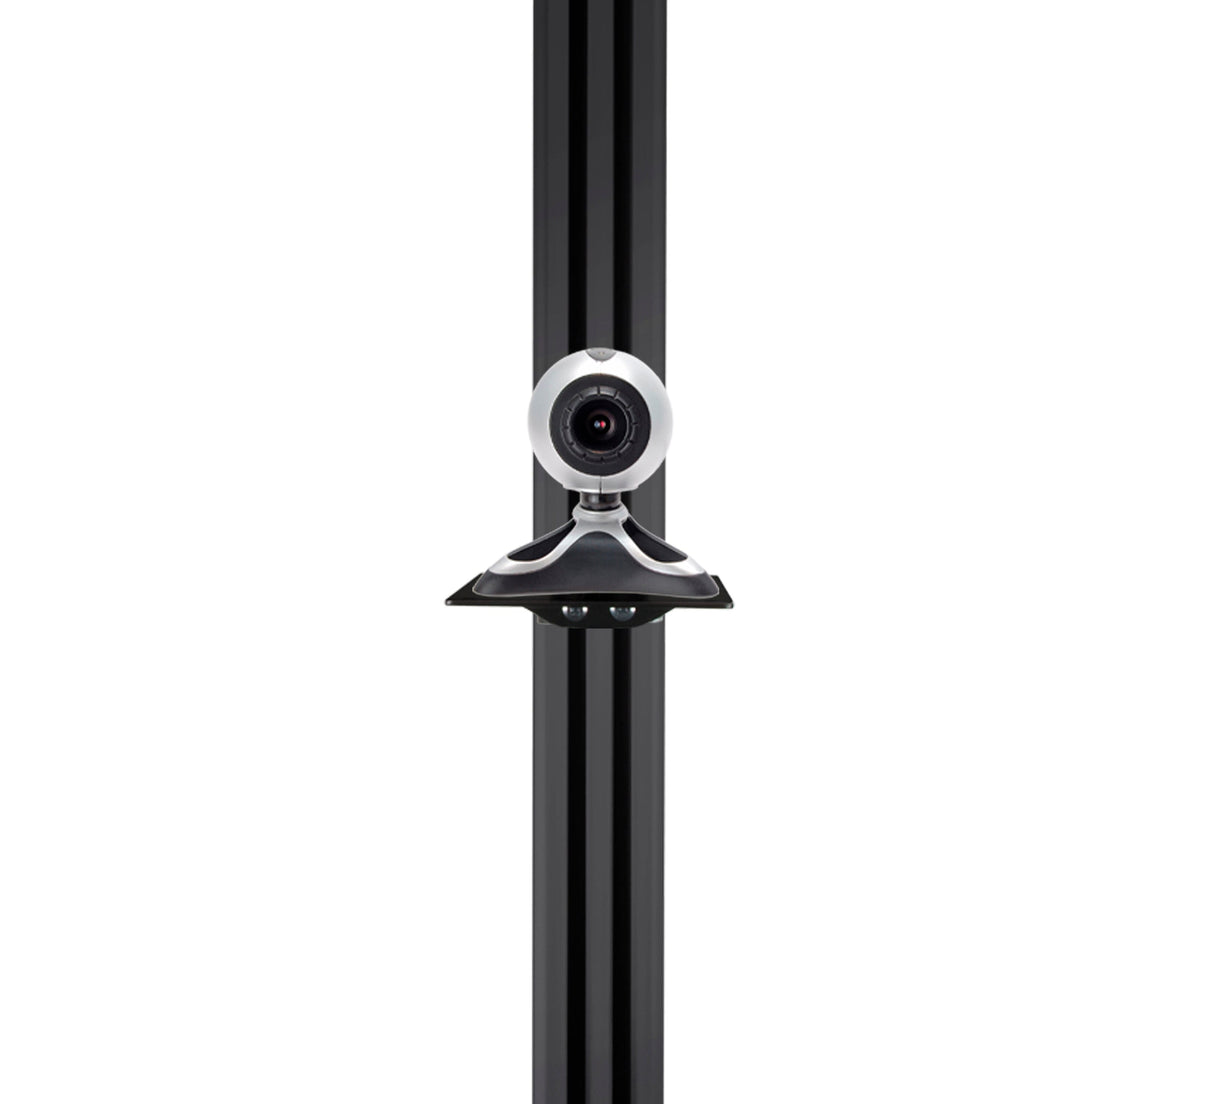 B-Tech BTF845 1.8m High Twin Screen Video Conferencing Stand for Screens up to 55 inches